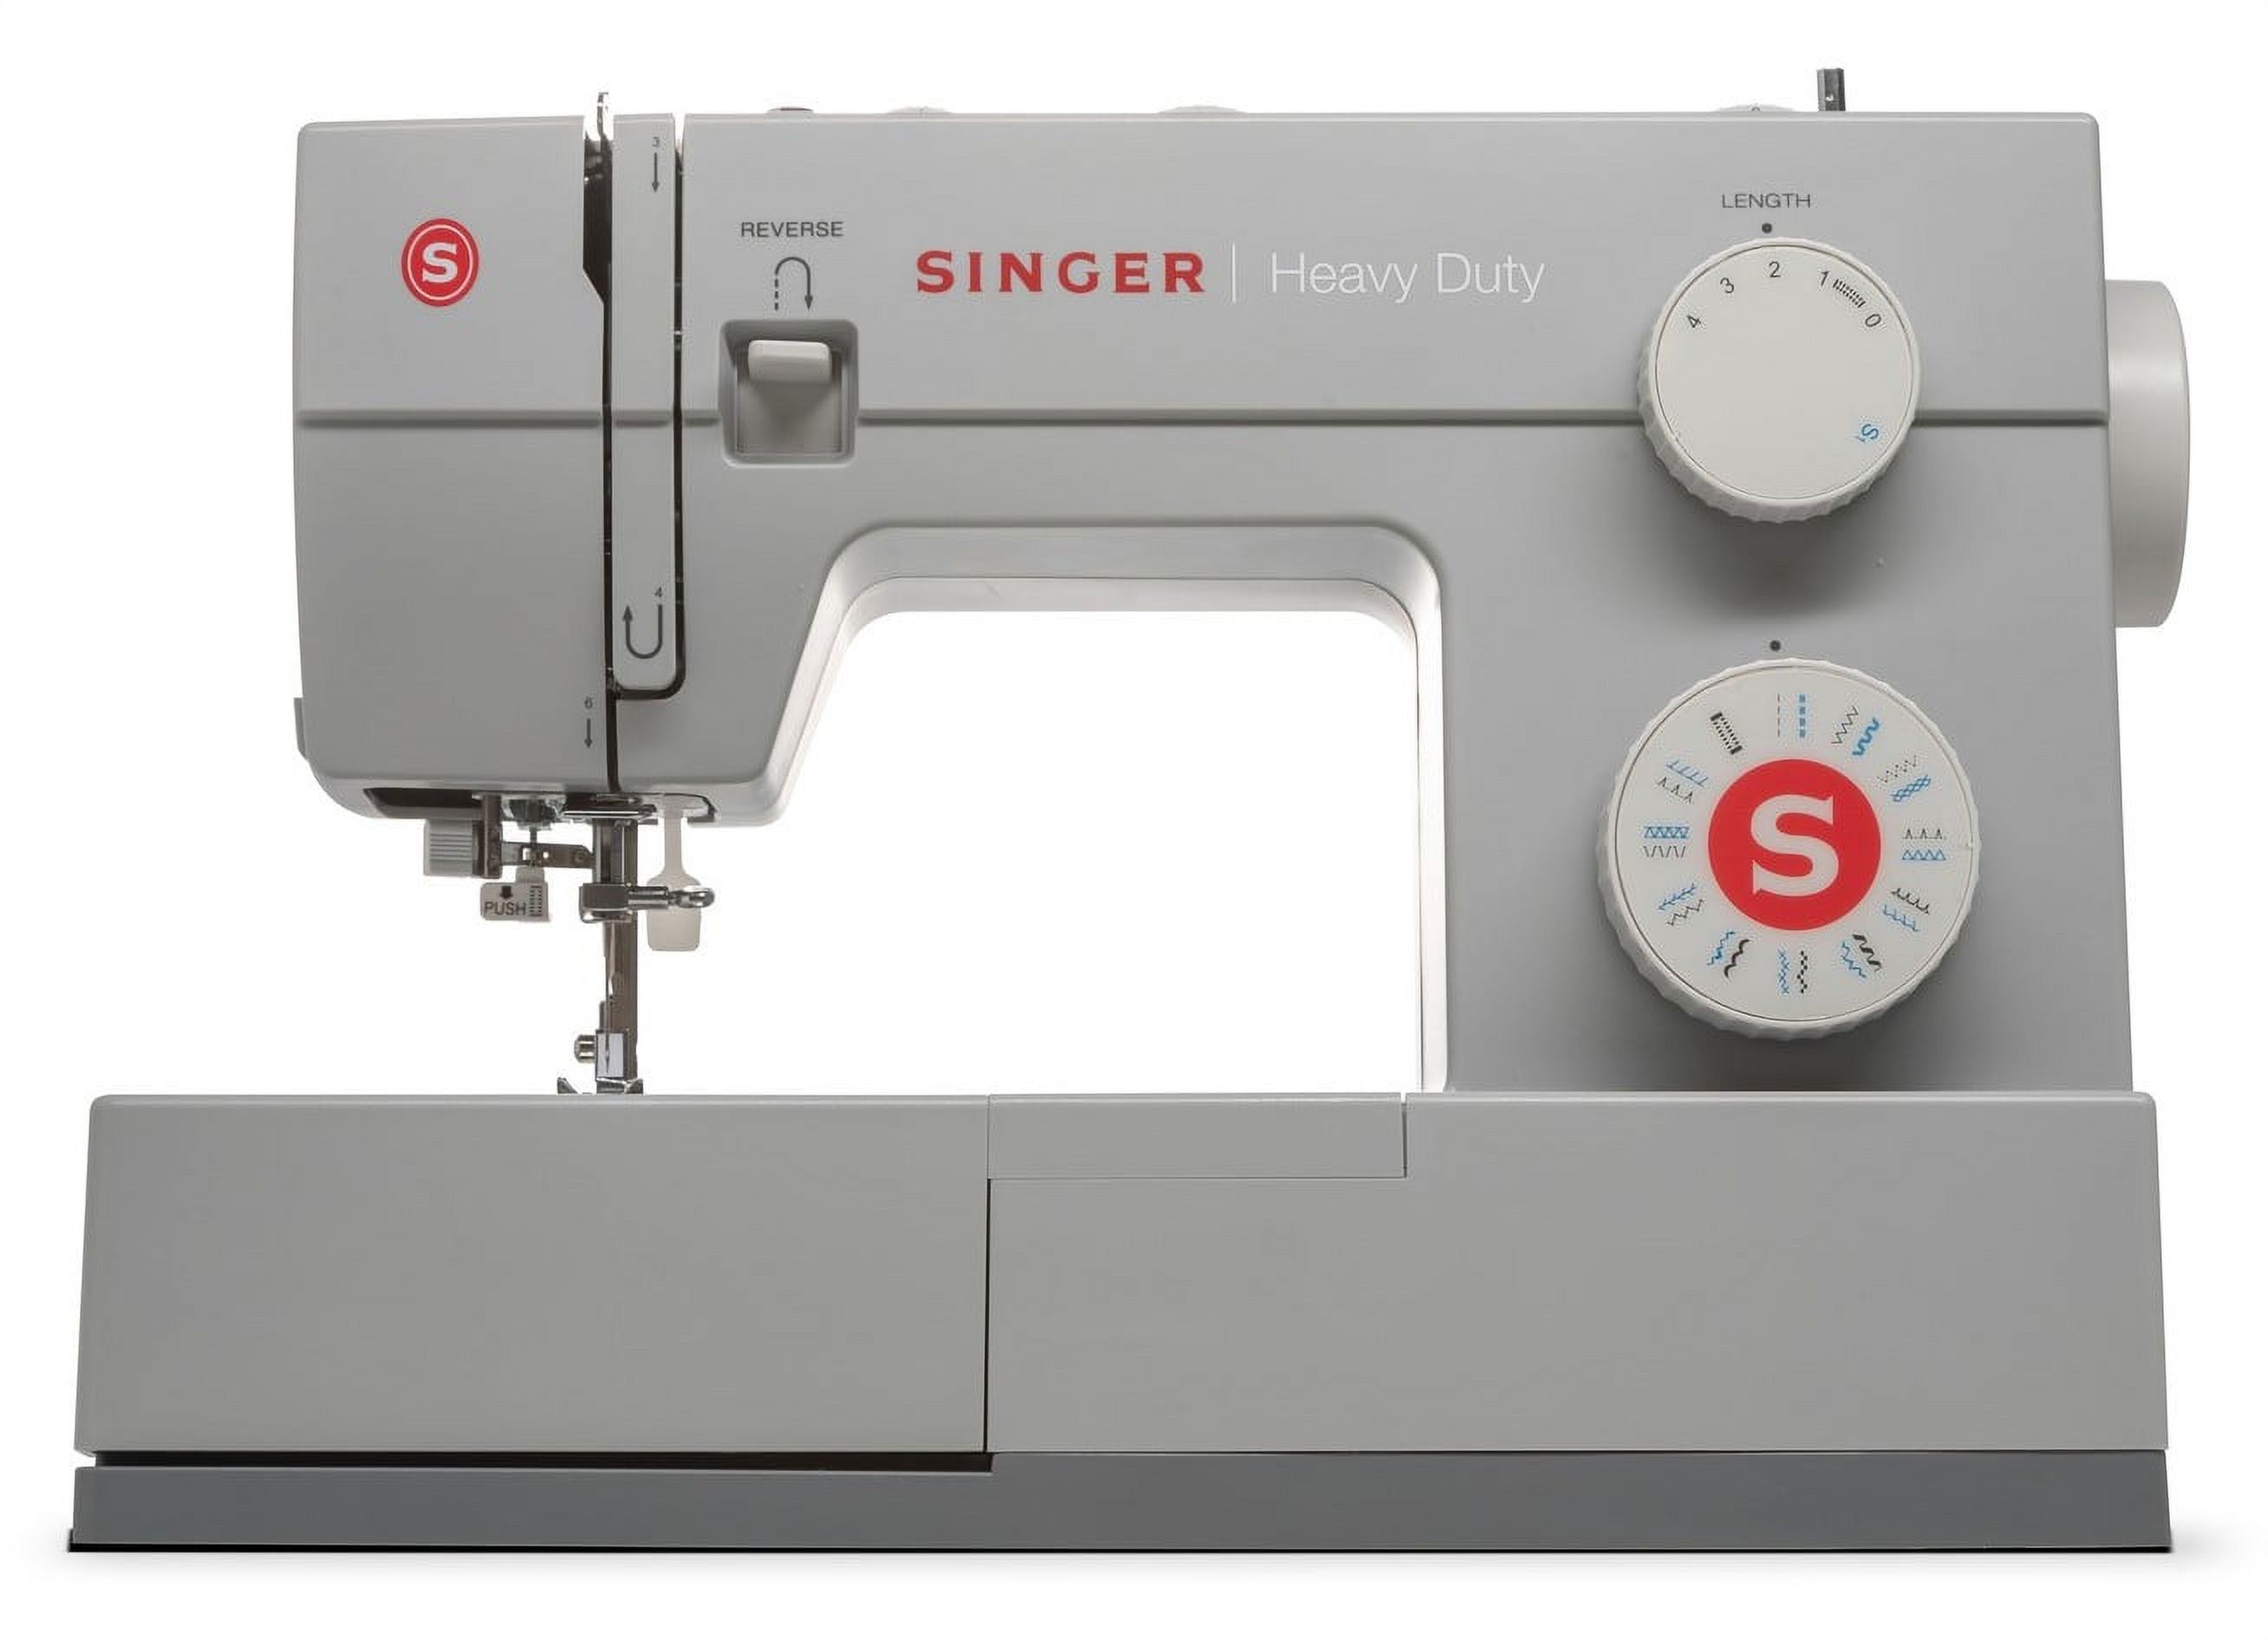 SINGER® Heavy Duty 44S Mechanical Sewing Machine, Powerful Performance, Great for All Projects & Fabrics, Four Accessory Feet included, Easy to Use, Professional Results - image 1 of 13